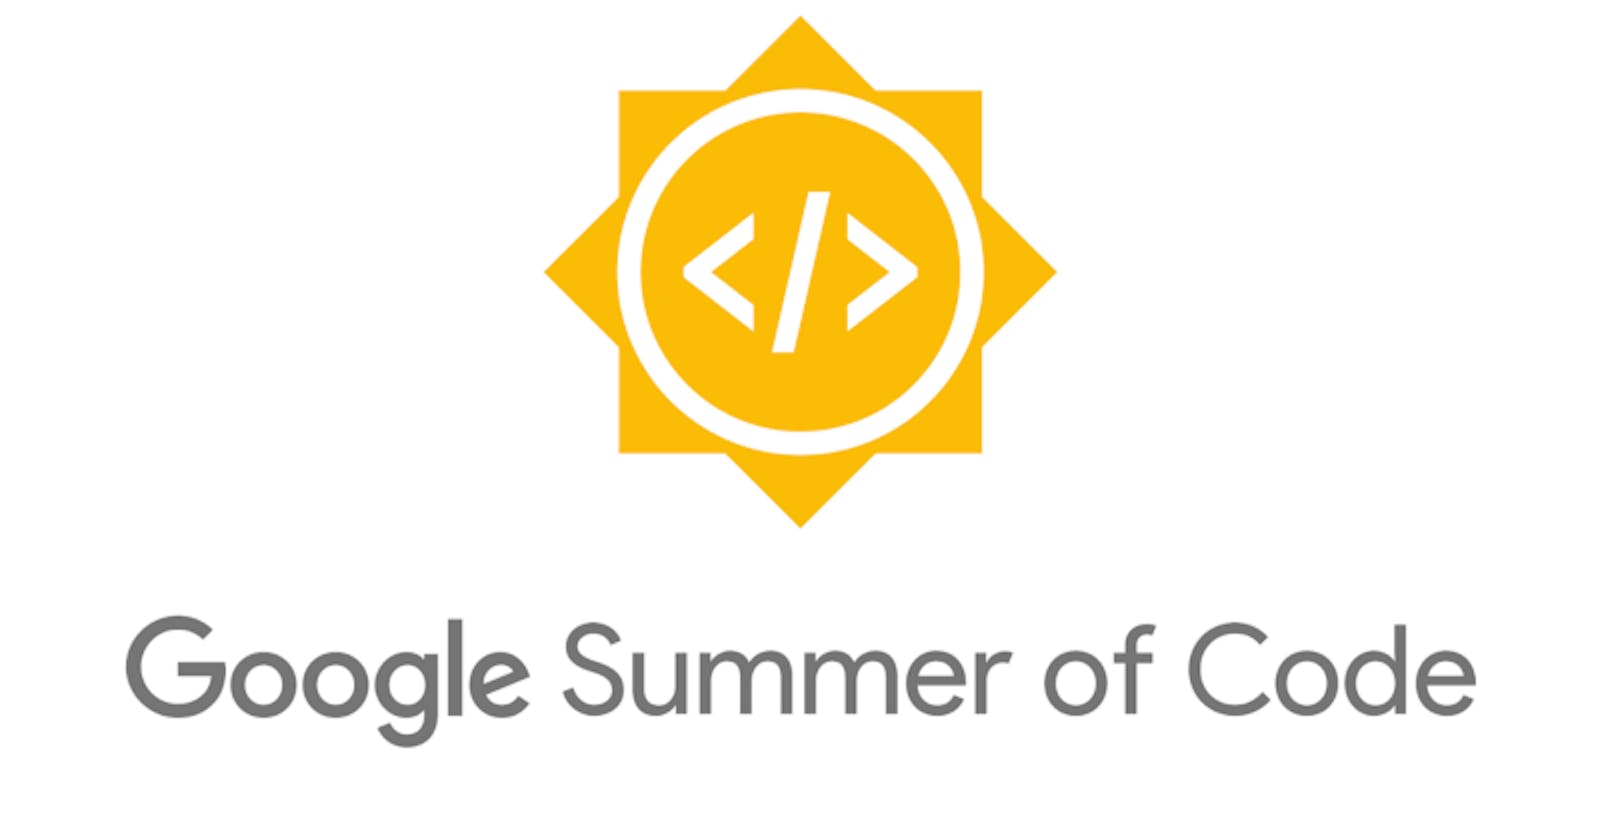 Does Google Summer Of Code (GSOC) get you google referral?